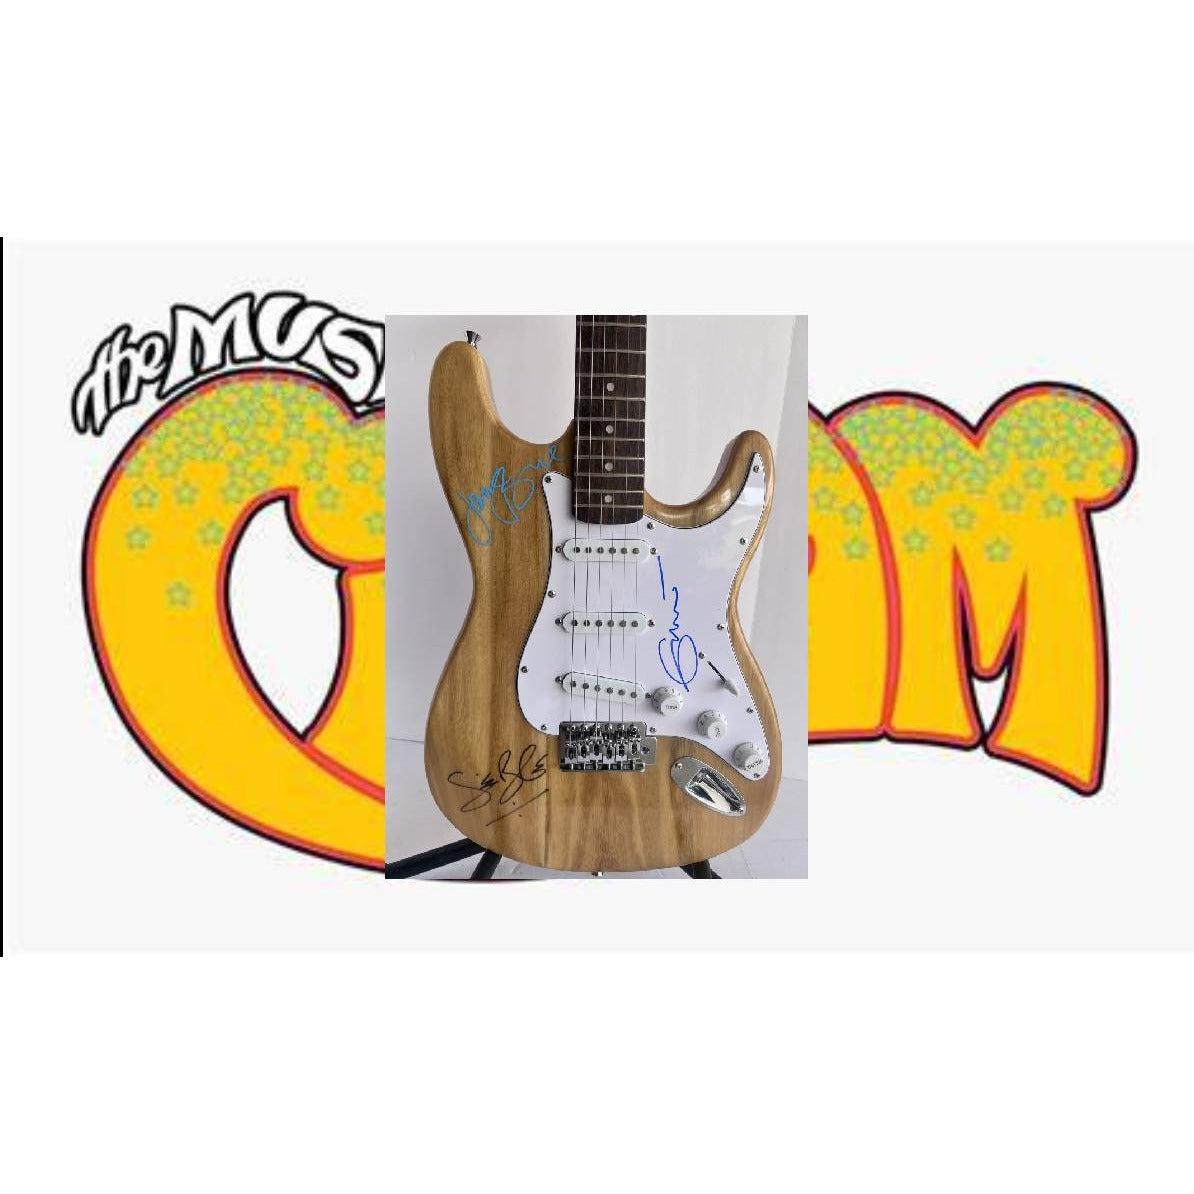 Eric Clapton Ginger Baker Jack Bruce Cream full size Huntington Stratocaster electric guitar signed with proof